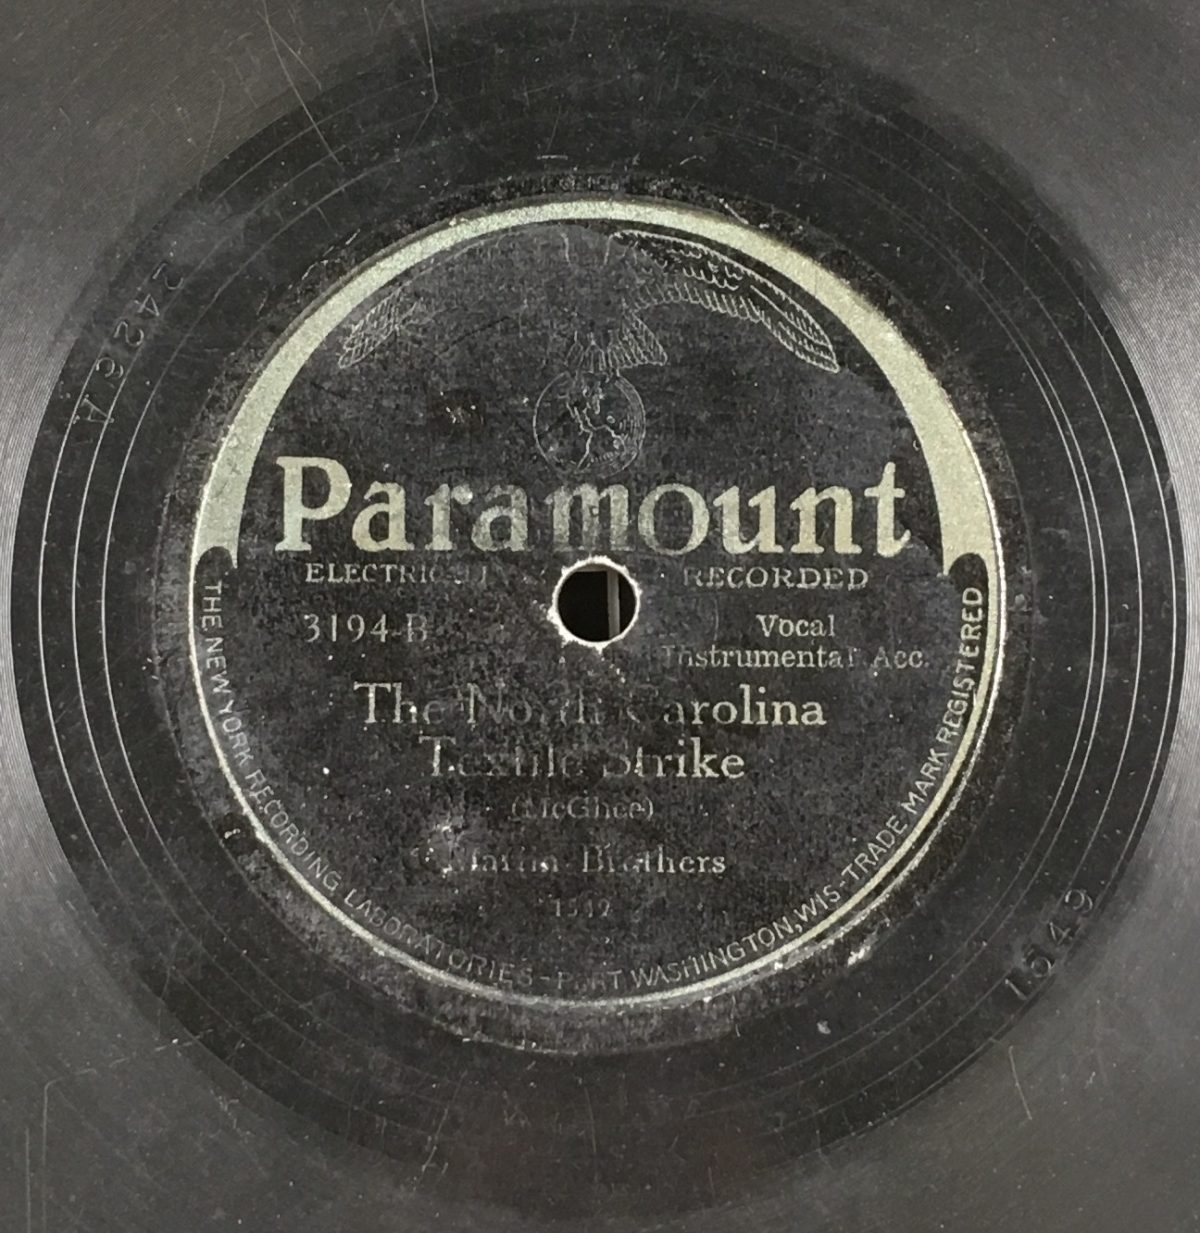 Record label for 78RPM record. Text reads: Paramount, Electrically Recorded. 3194-B. Vocal, Instrumental Acc. The North Carolina Textile Strike (McGhee). Martin Brothers. Bottom of label reads: "The New York Recording Laboratories - Port Washington, Wis-Trade Mark Registered."